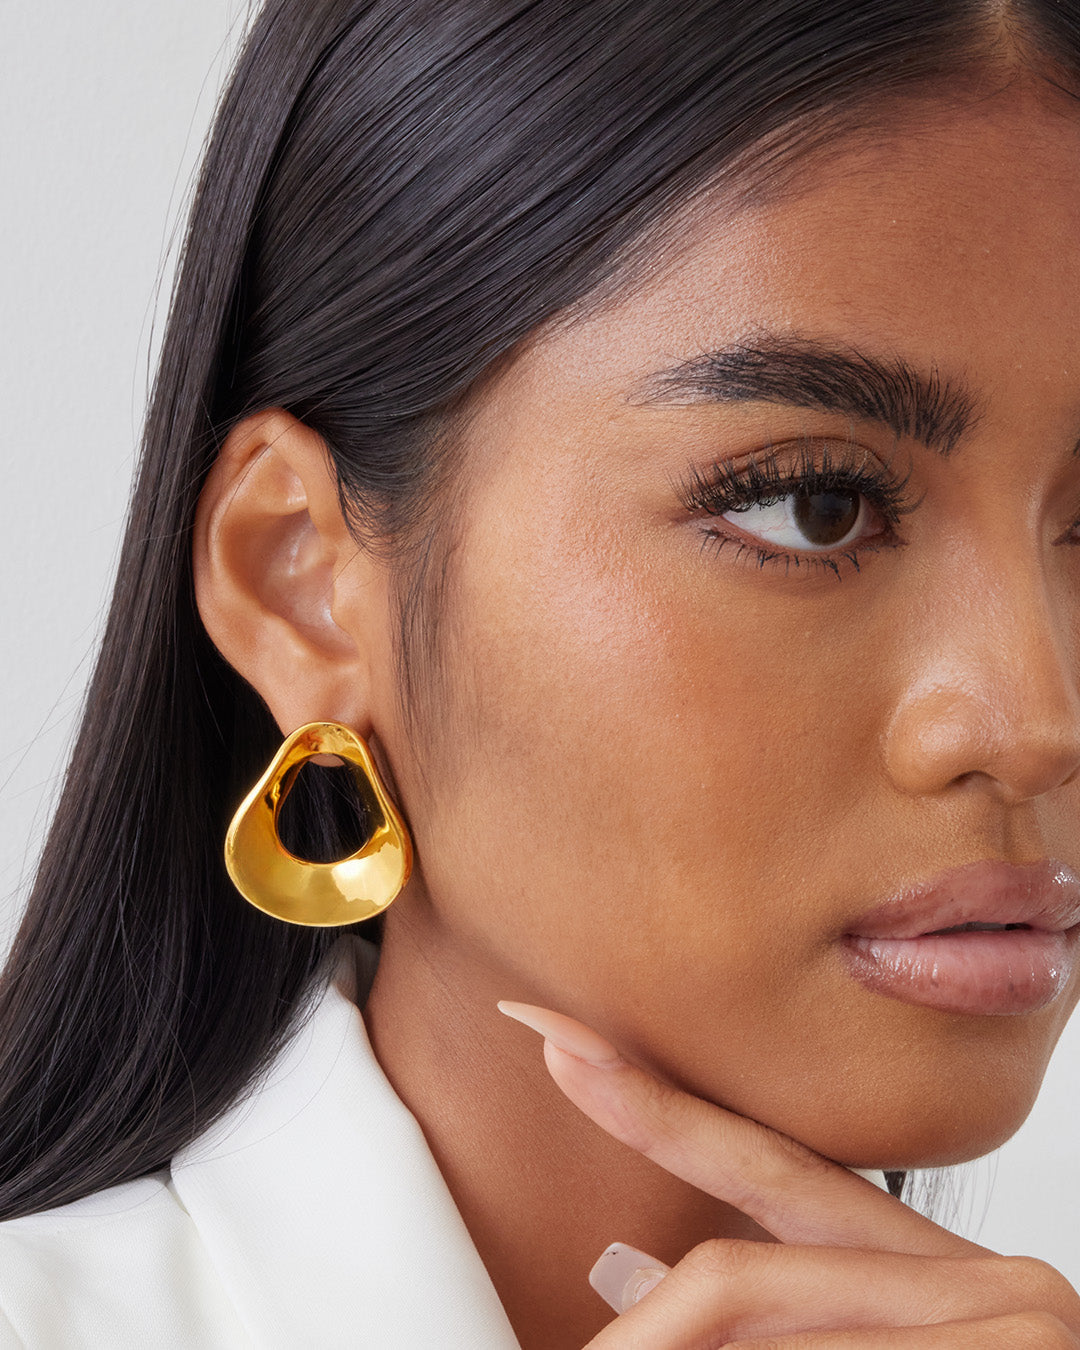 This is the product picture of an oversized freeform shape hoop earrings plated in gold in sterling silver material